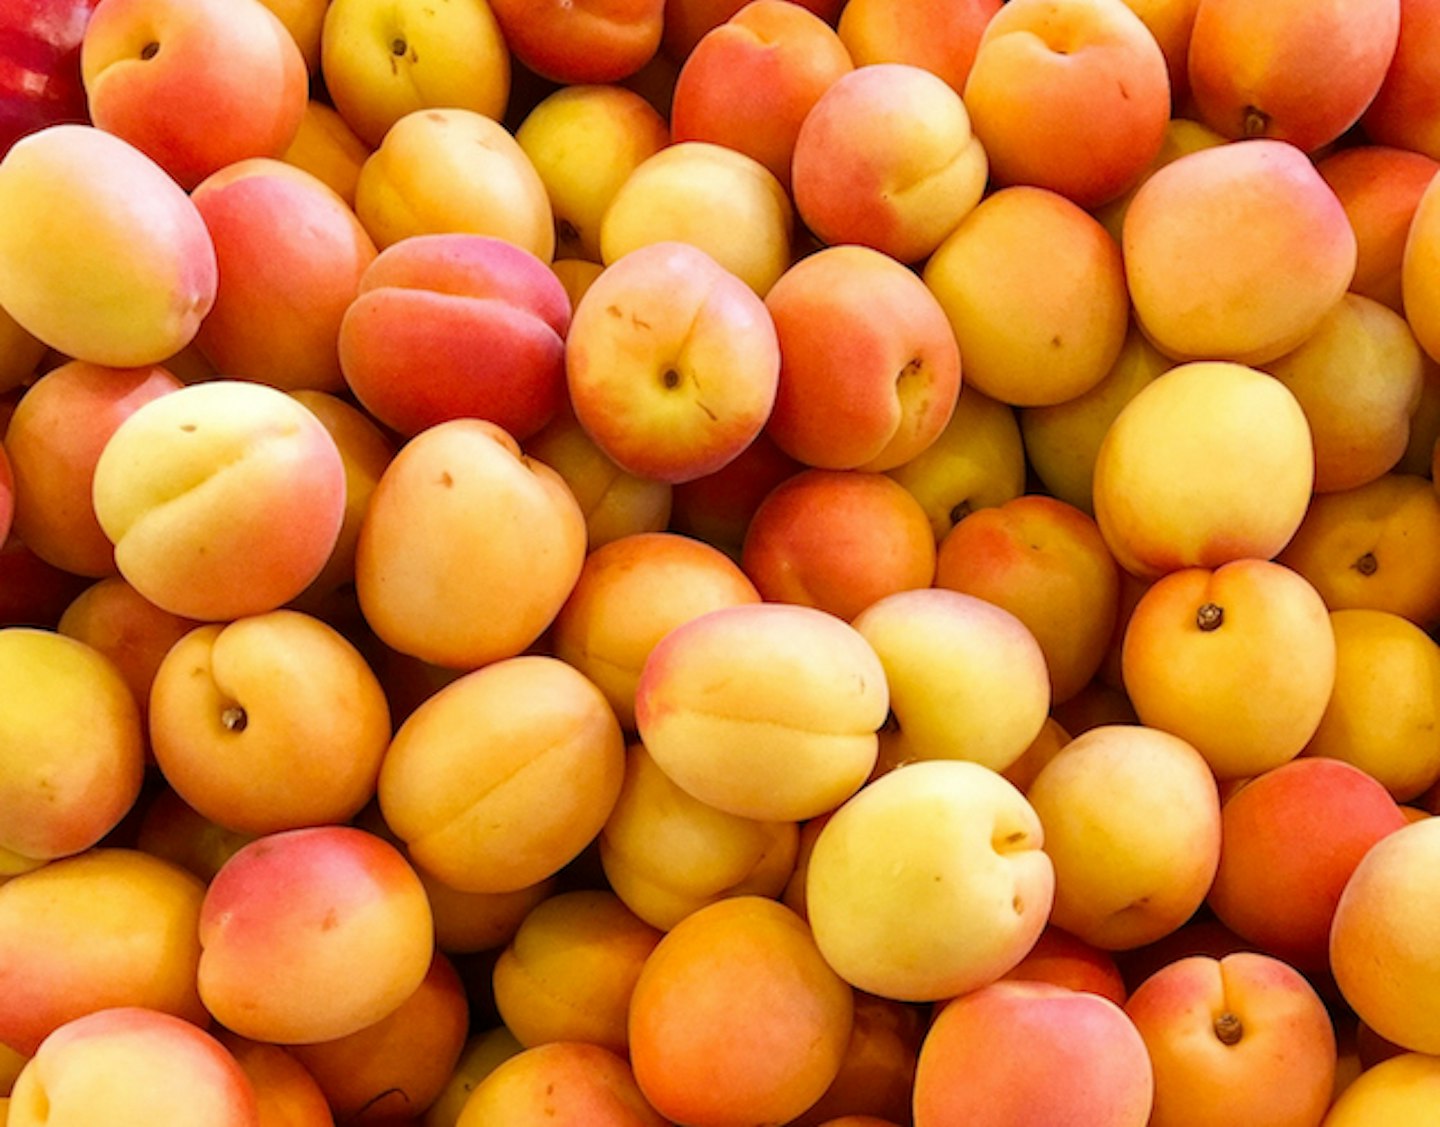 Lots of peaches